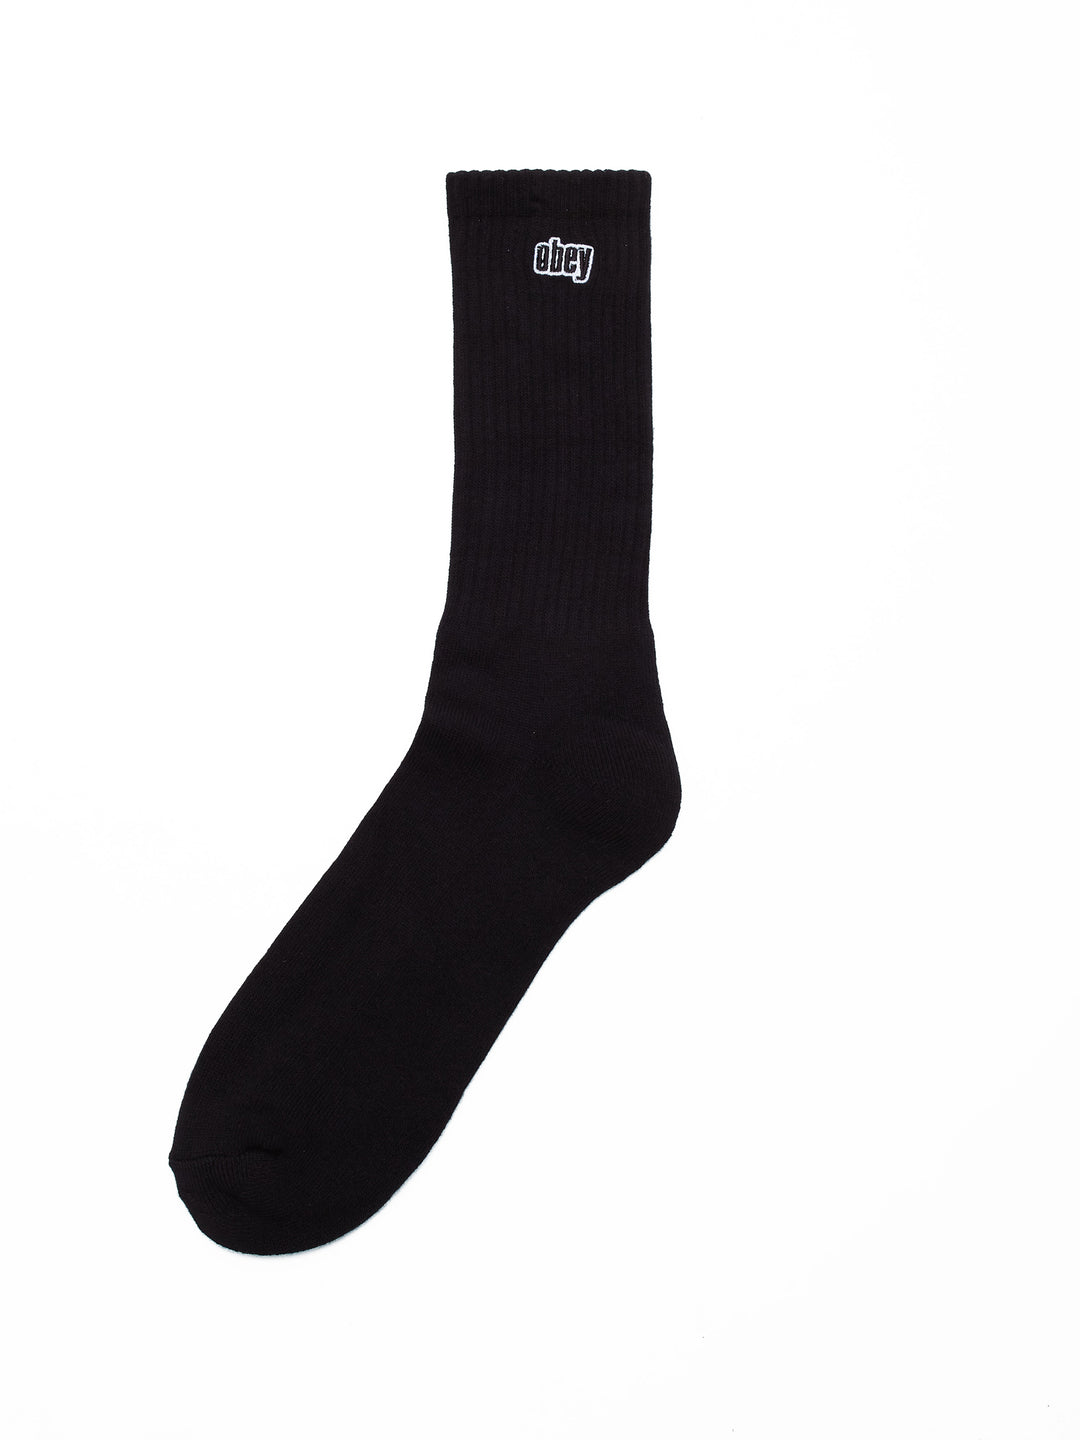 New Times Socks II | Black - West of Camden - Main Image Number 1 of 1